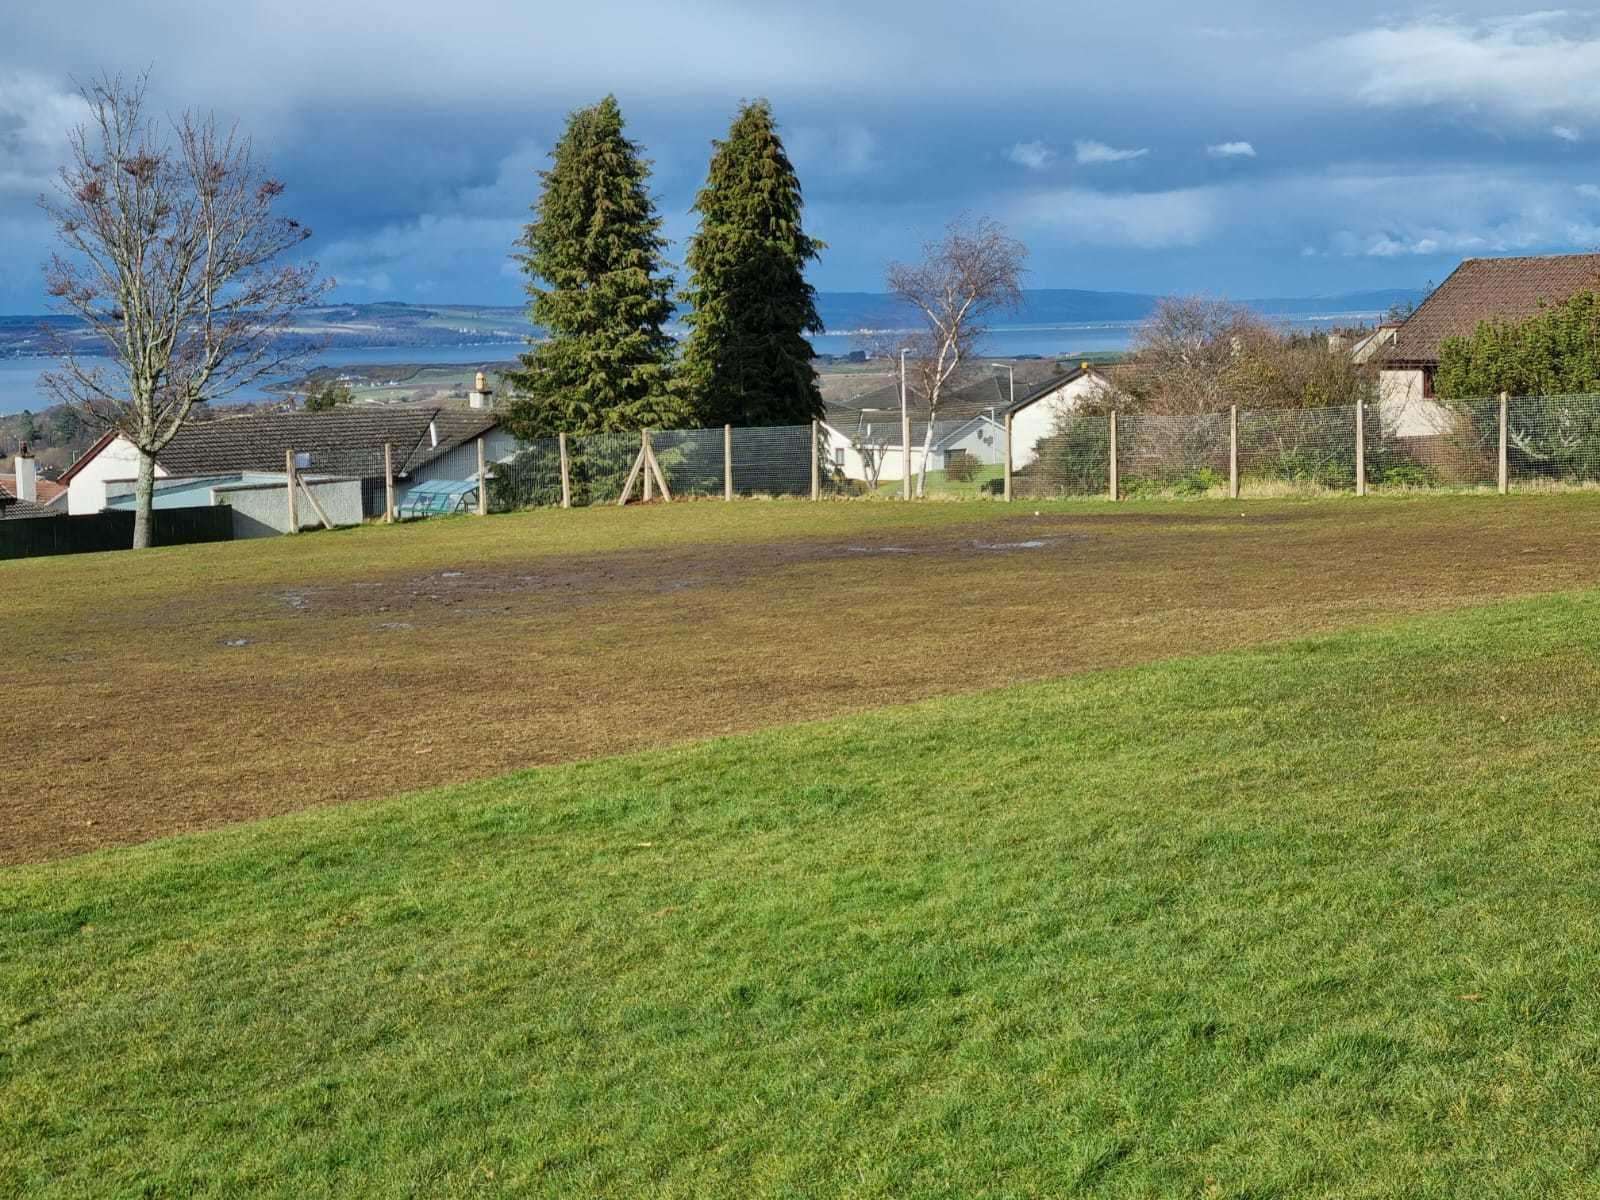 Burn Brae Park in March, when the goalposts were removed.